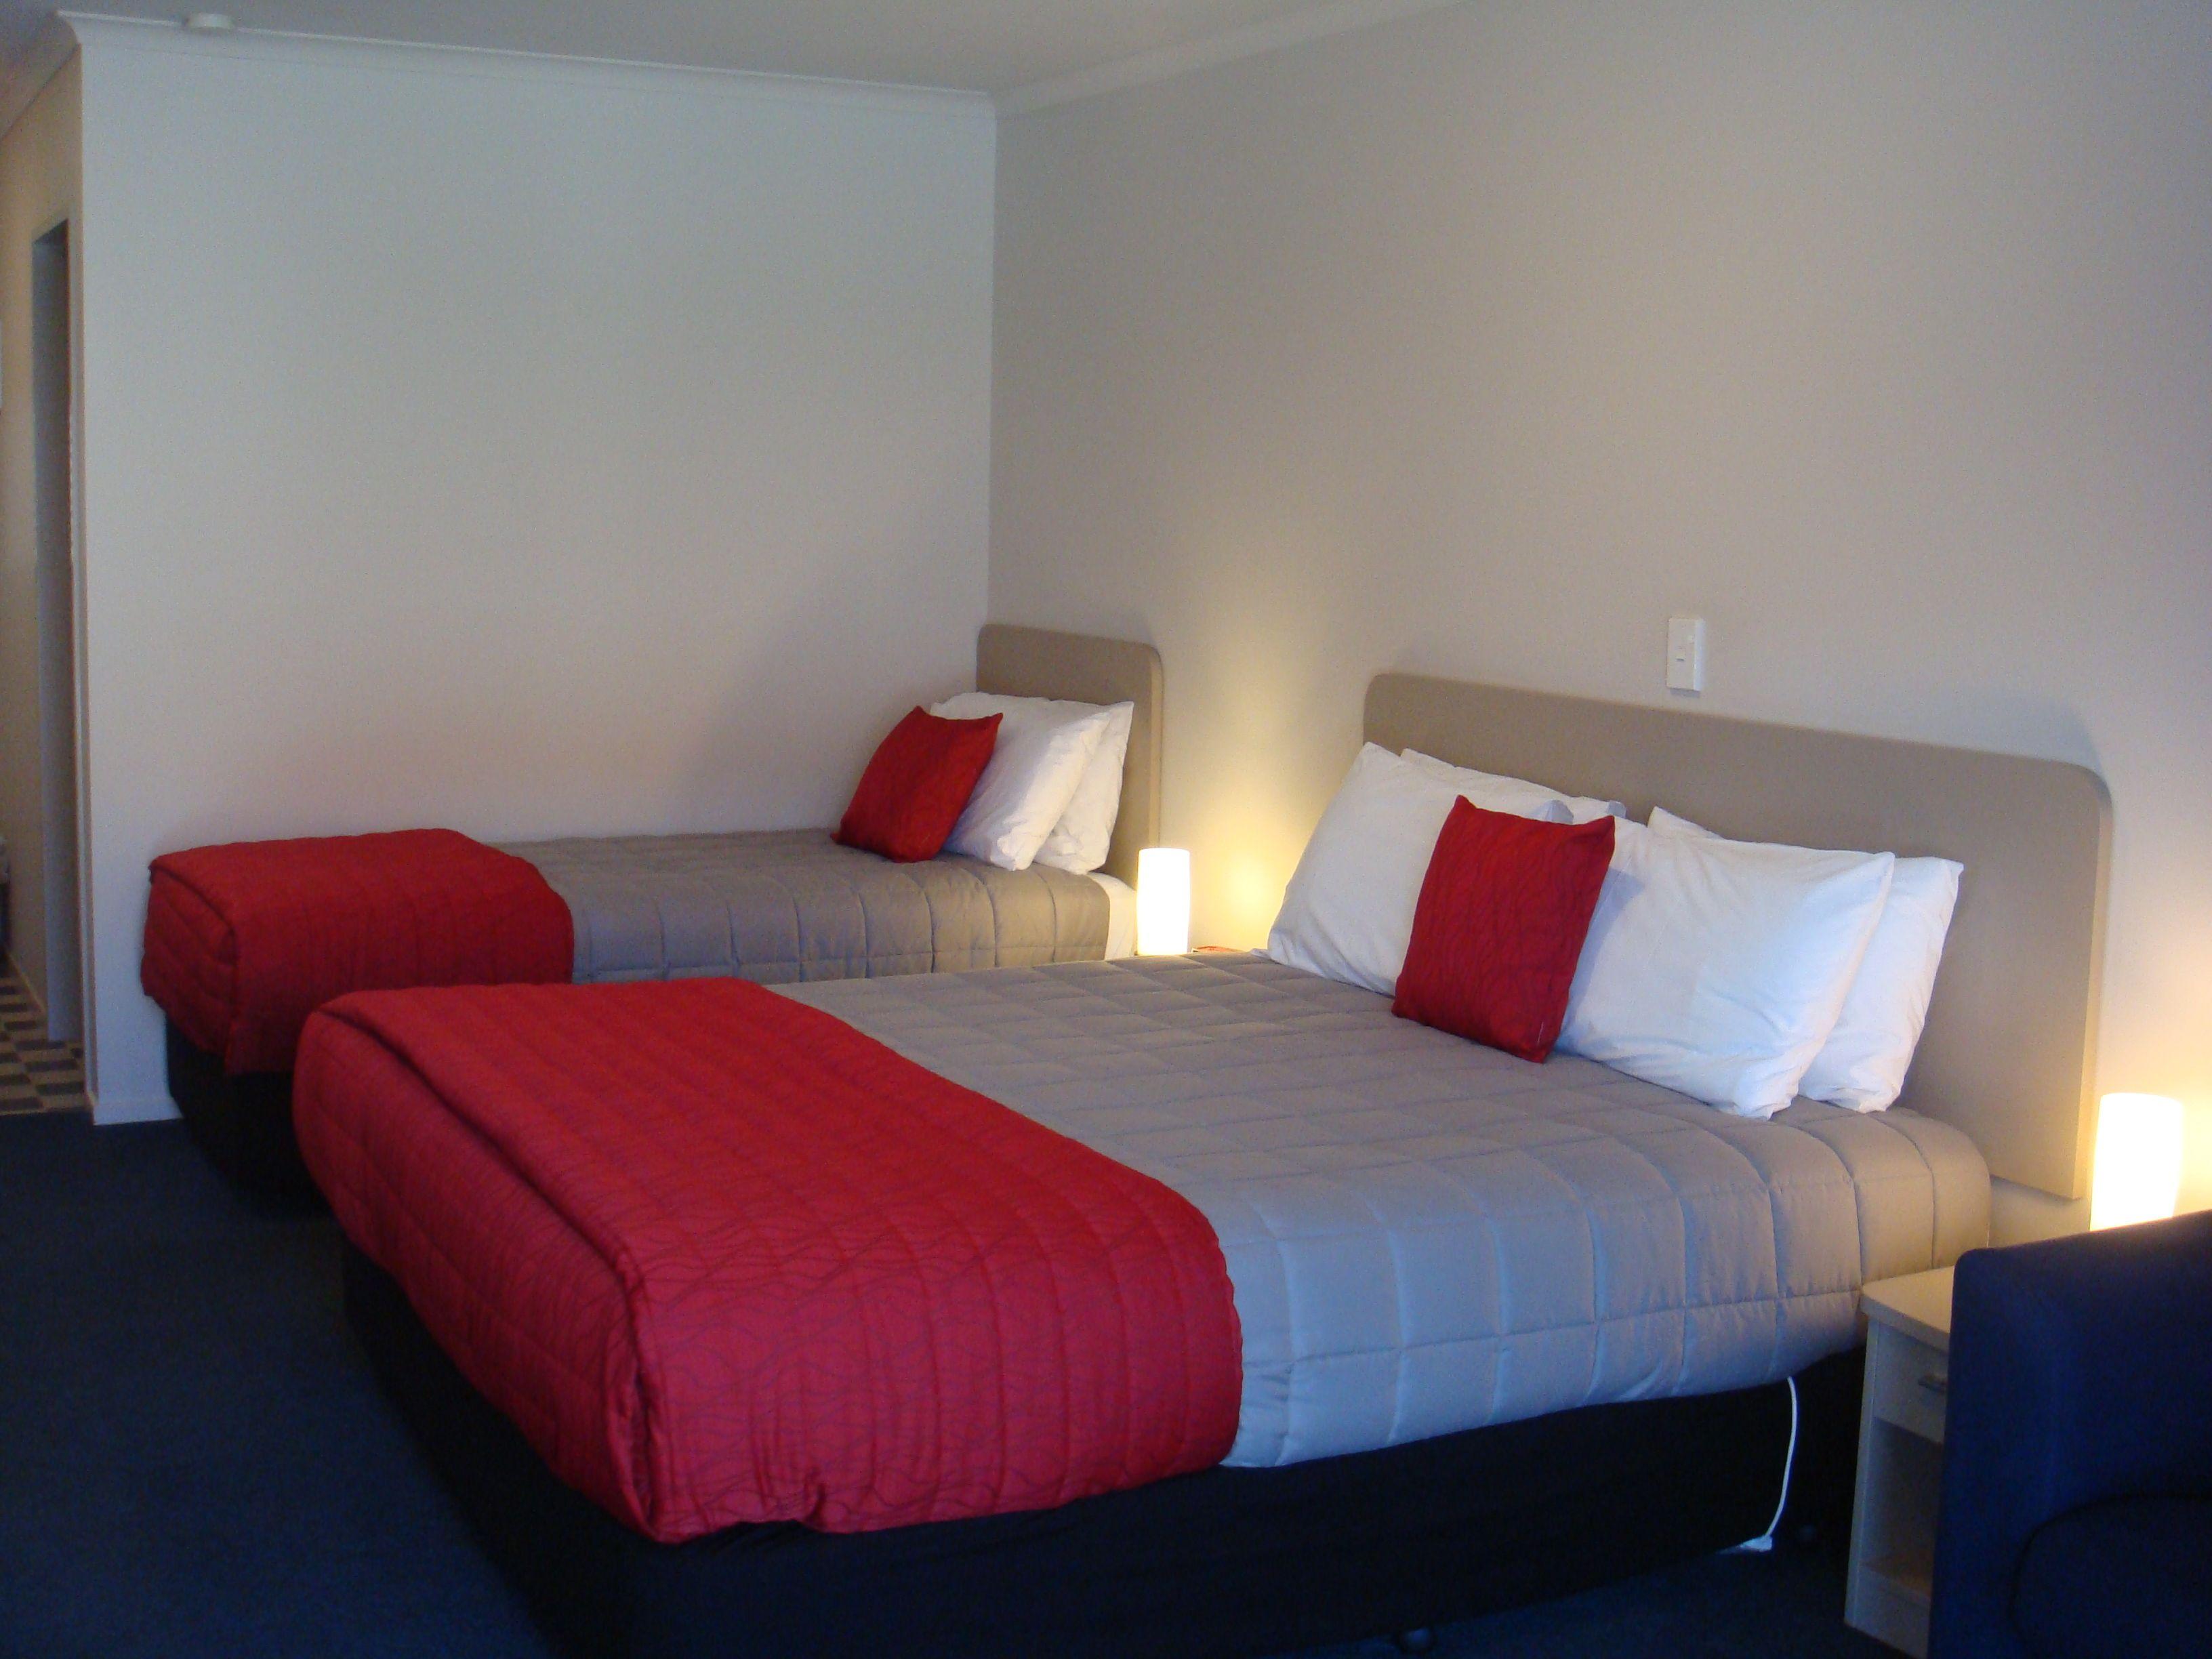 Superior King Plus Single Bed suite, King Bed and Single Bed sleeps 1-3 guests. Double glazed with Air con and heat pump for guest comfort. Electric blankets, fully self-contained kitchen, ensuite bathroom with shower, hairdryer, LCD TV with Sky. Work station with wireless broadband.